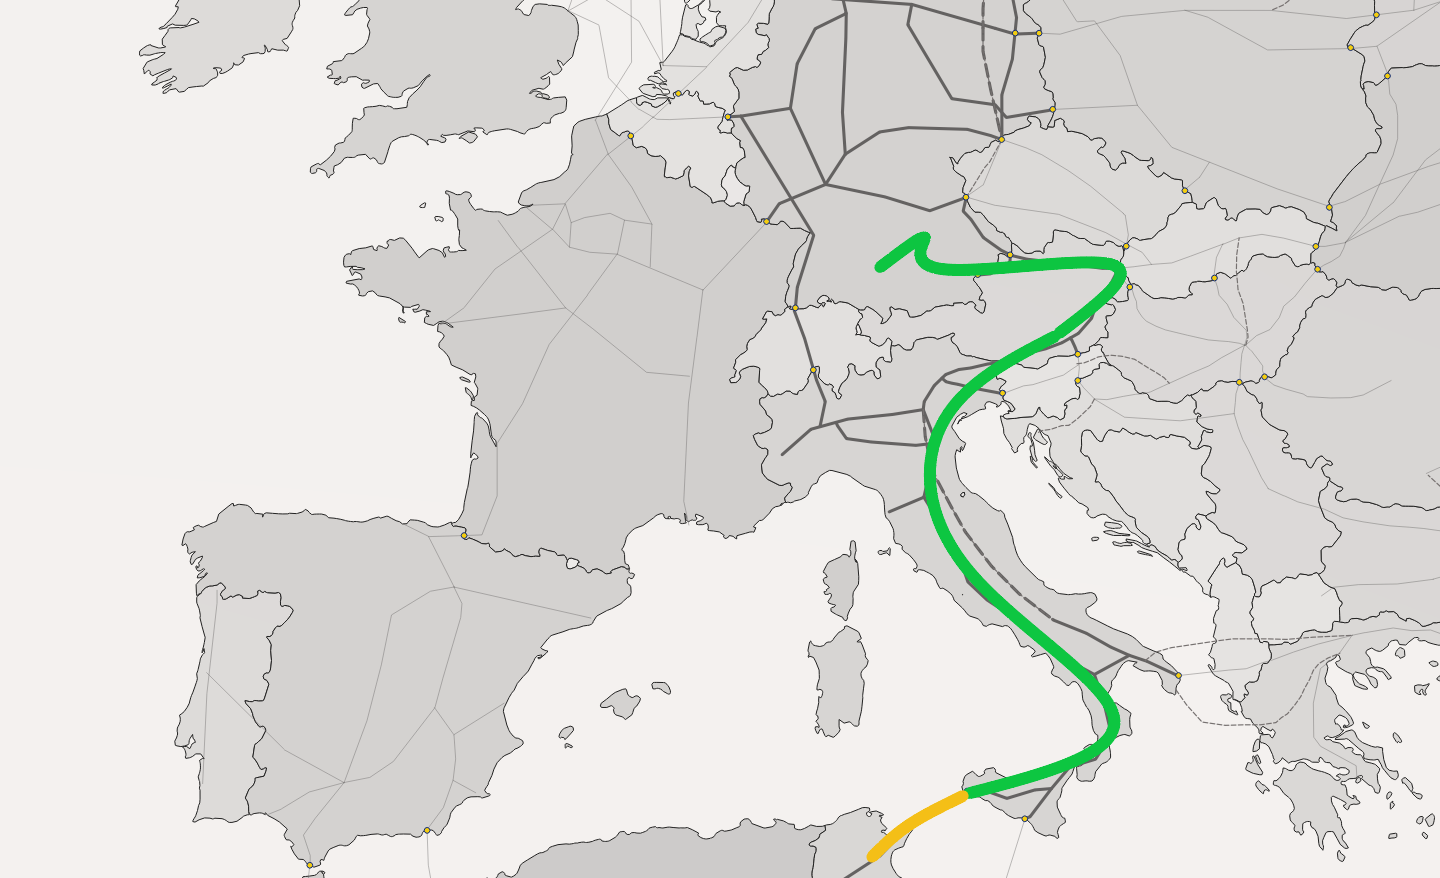 Austria, Germany, and Italy Unite to Establish Crucial Hydrogen Corridor from Northern Africa to Central Europe